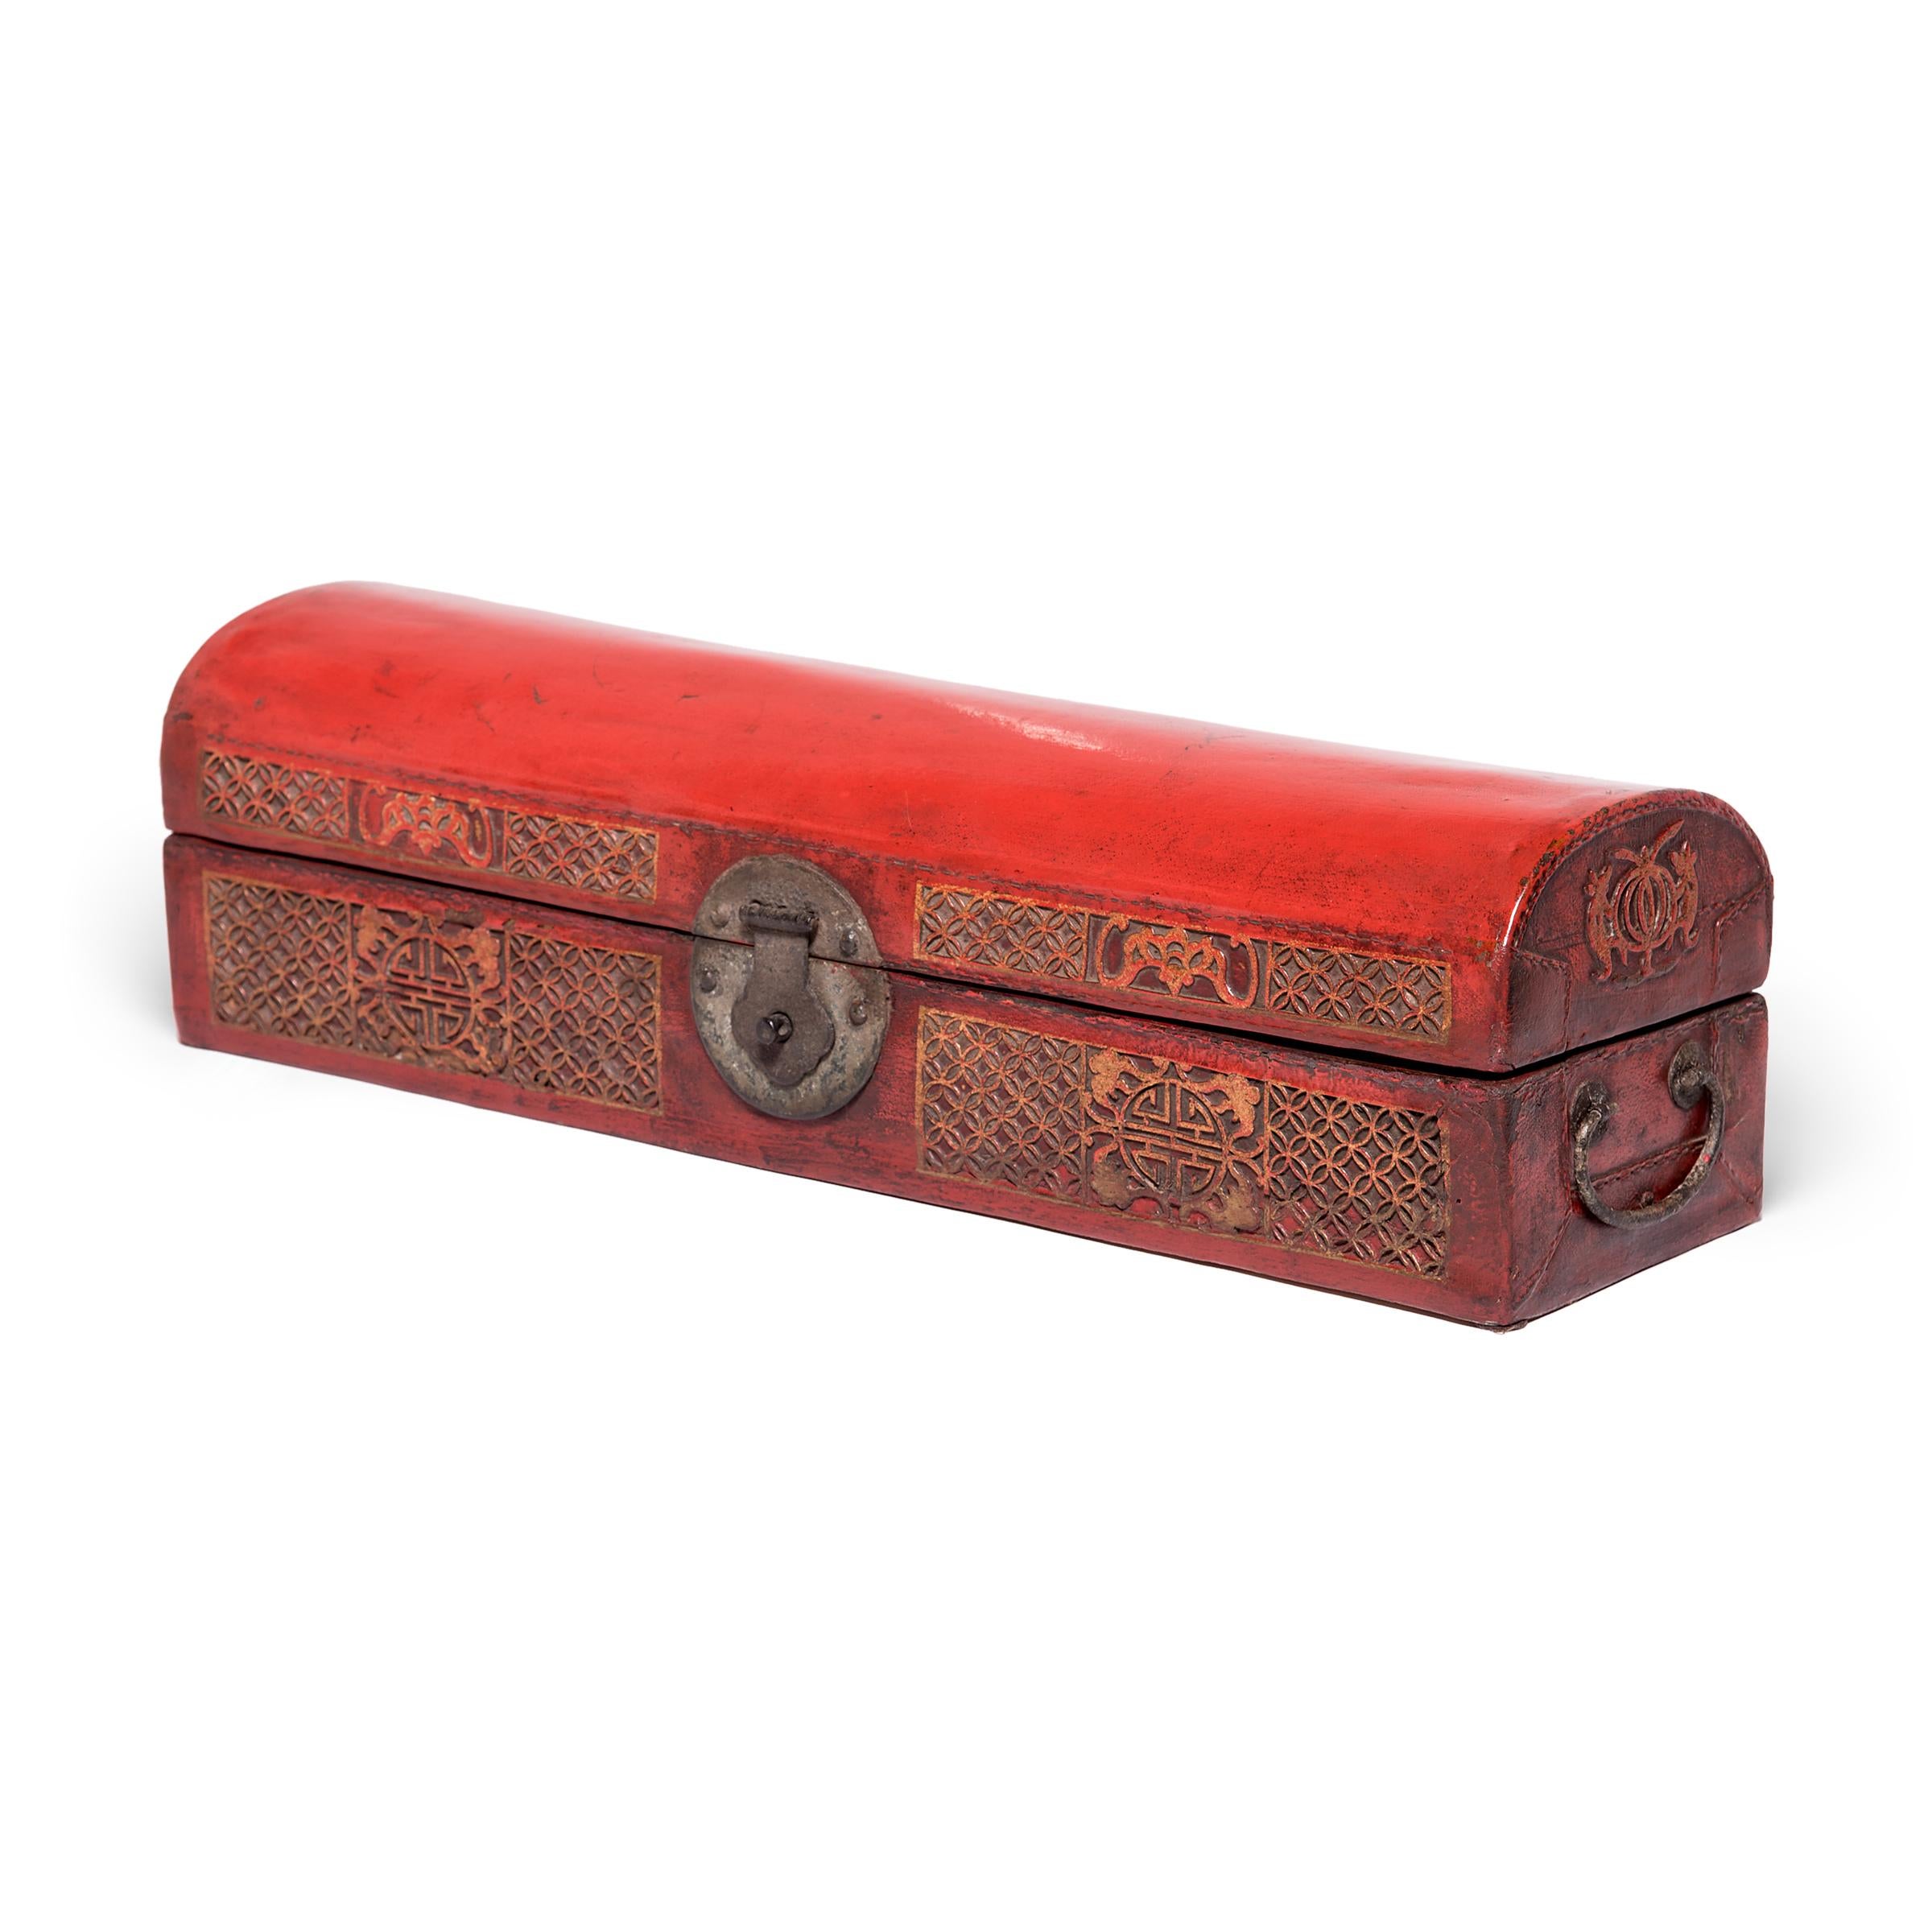 Beautifully proportioned and vibrantly colored, this early 20th-century document box likely once sat on the writing desk of a prominent Qing-dynasty scholar. The perfect size for a rolled-up scroll, the box was used to store and protect his works of